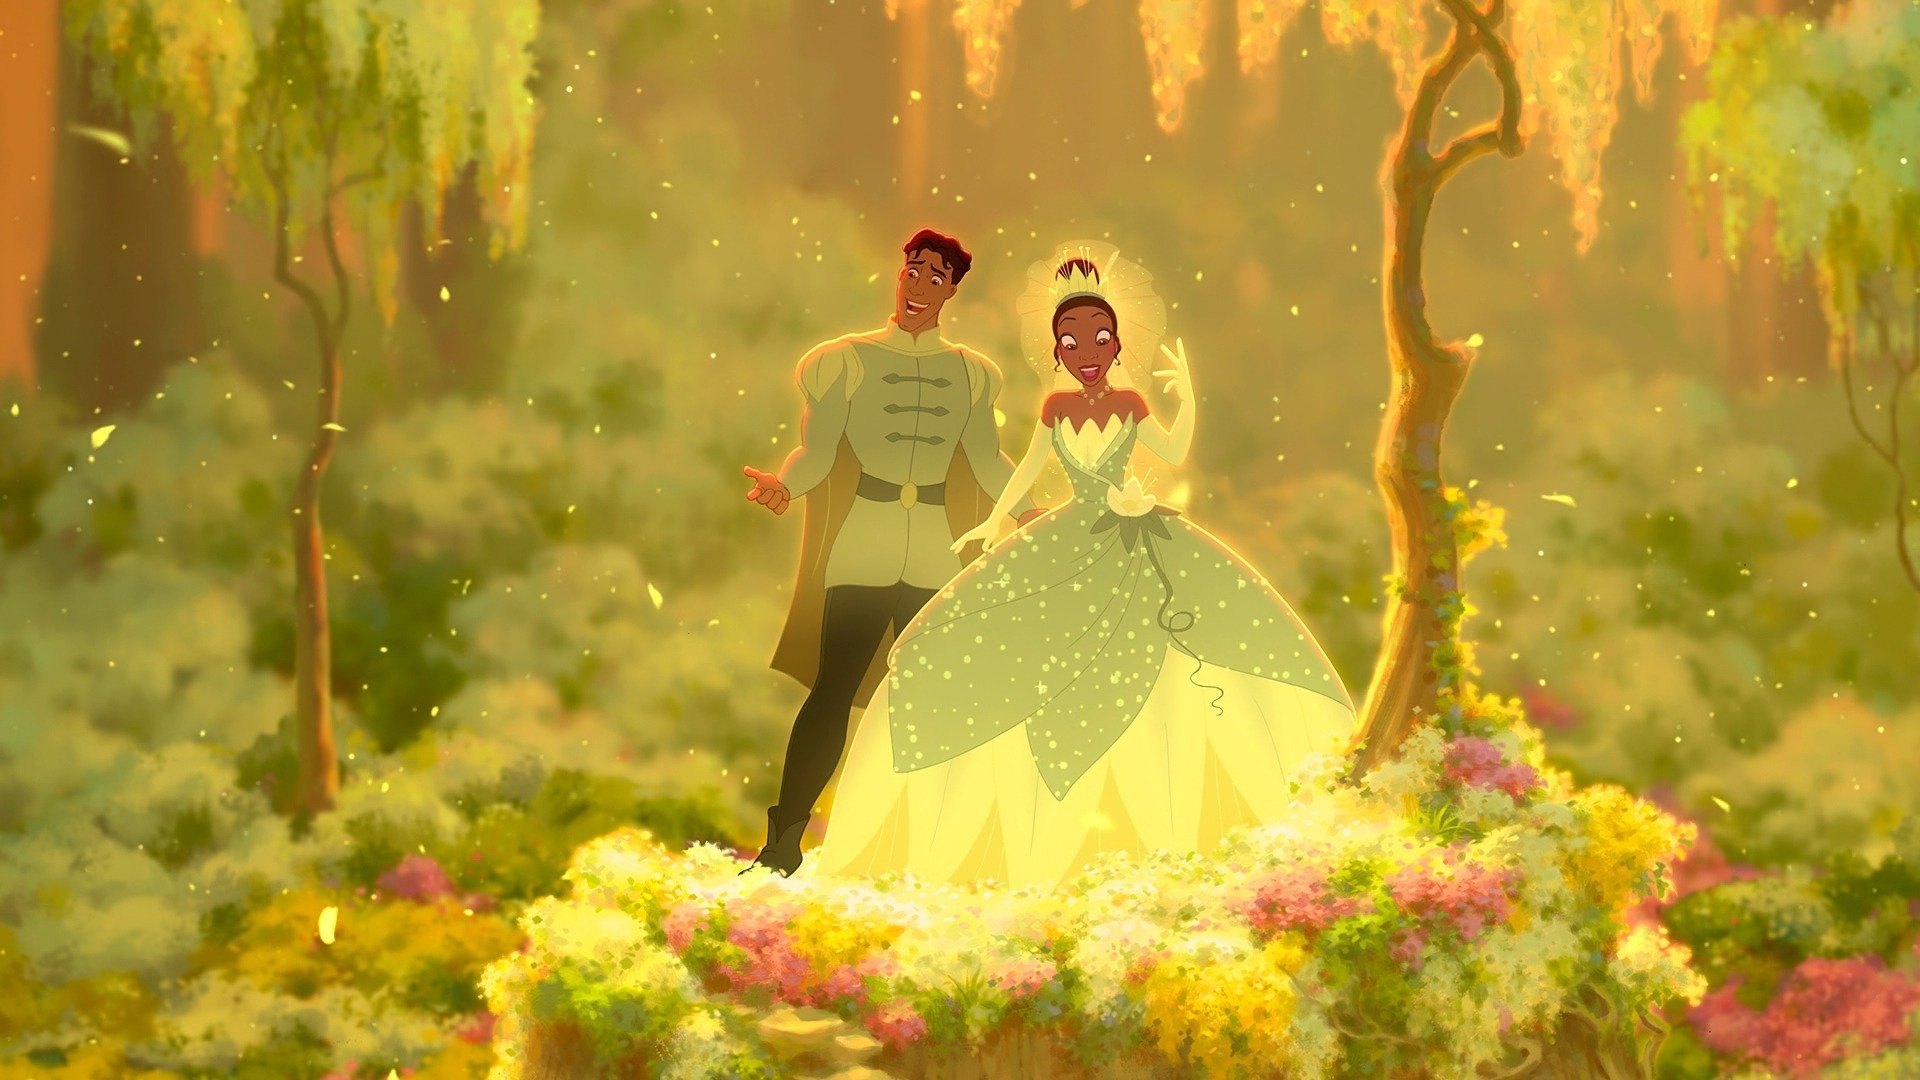 Prince Naveen from The Princess and the Frog - wide 7